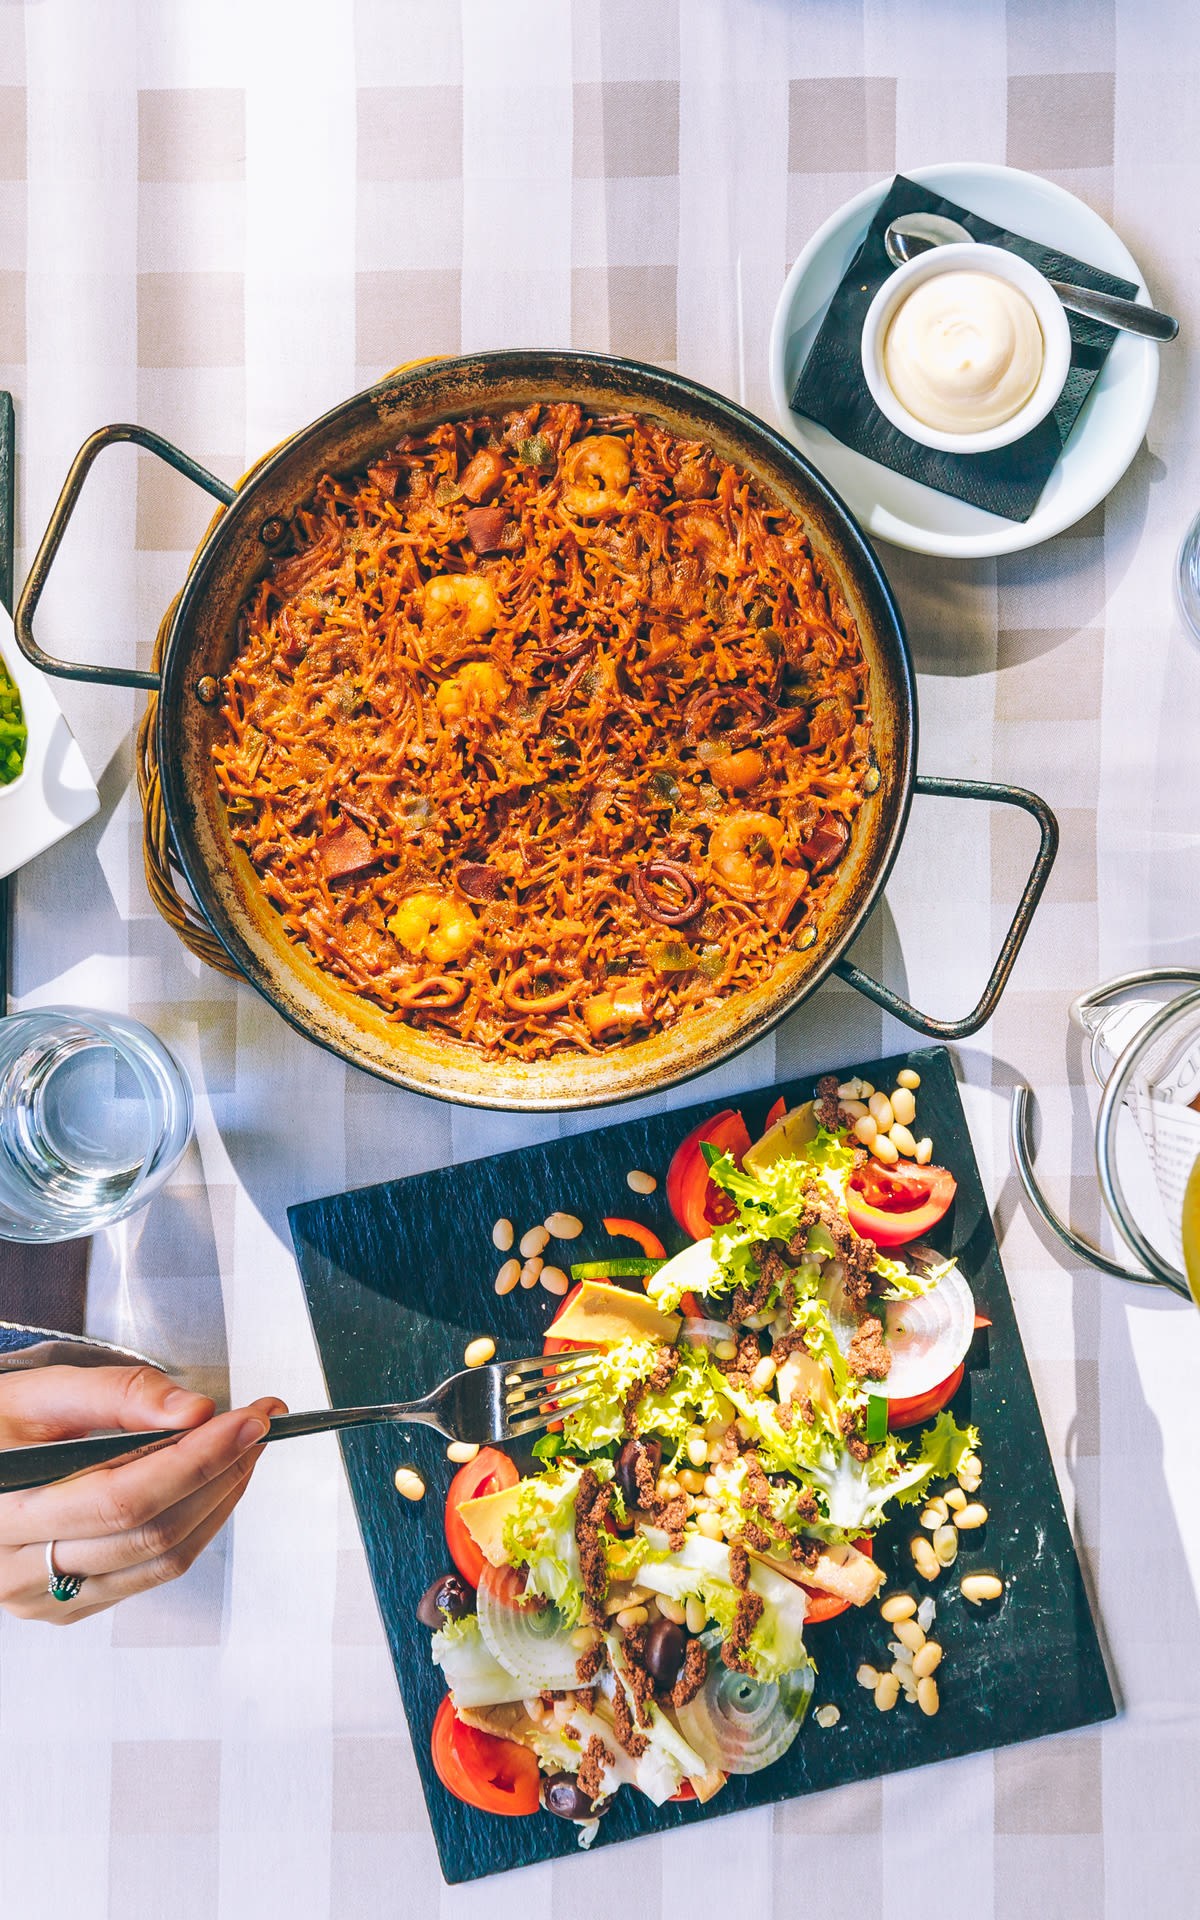 Table with paella and Mediterranean salad